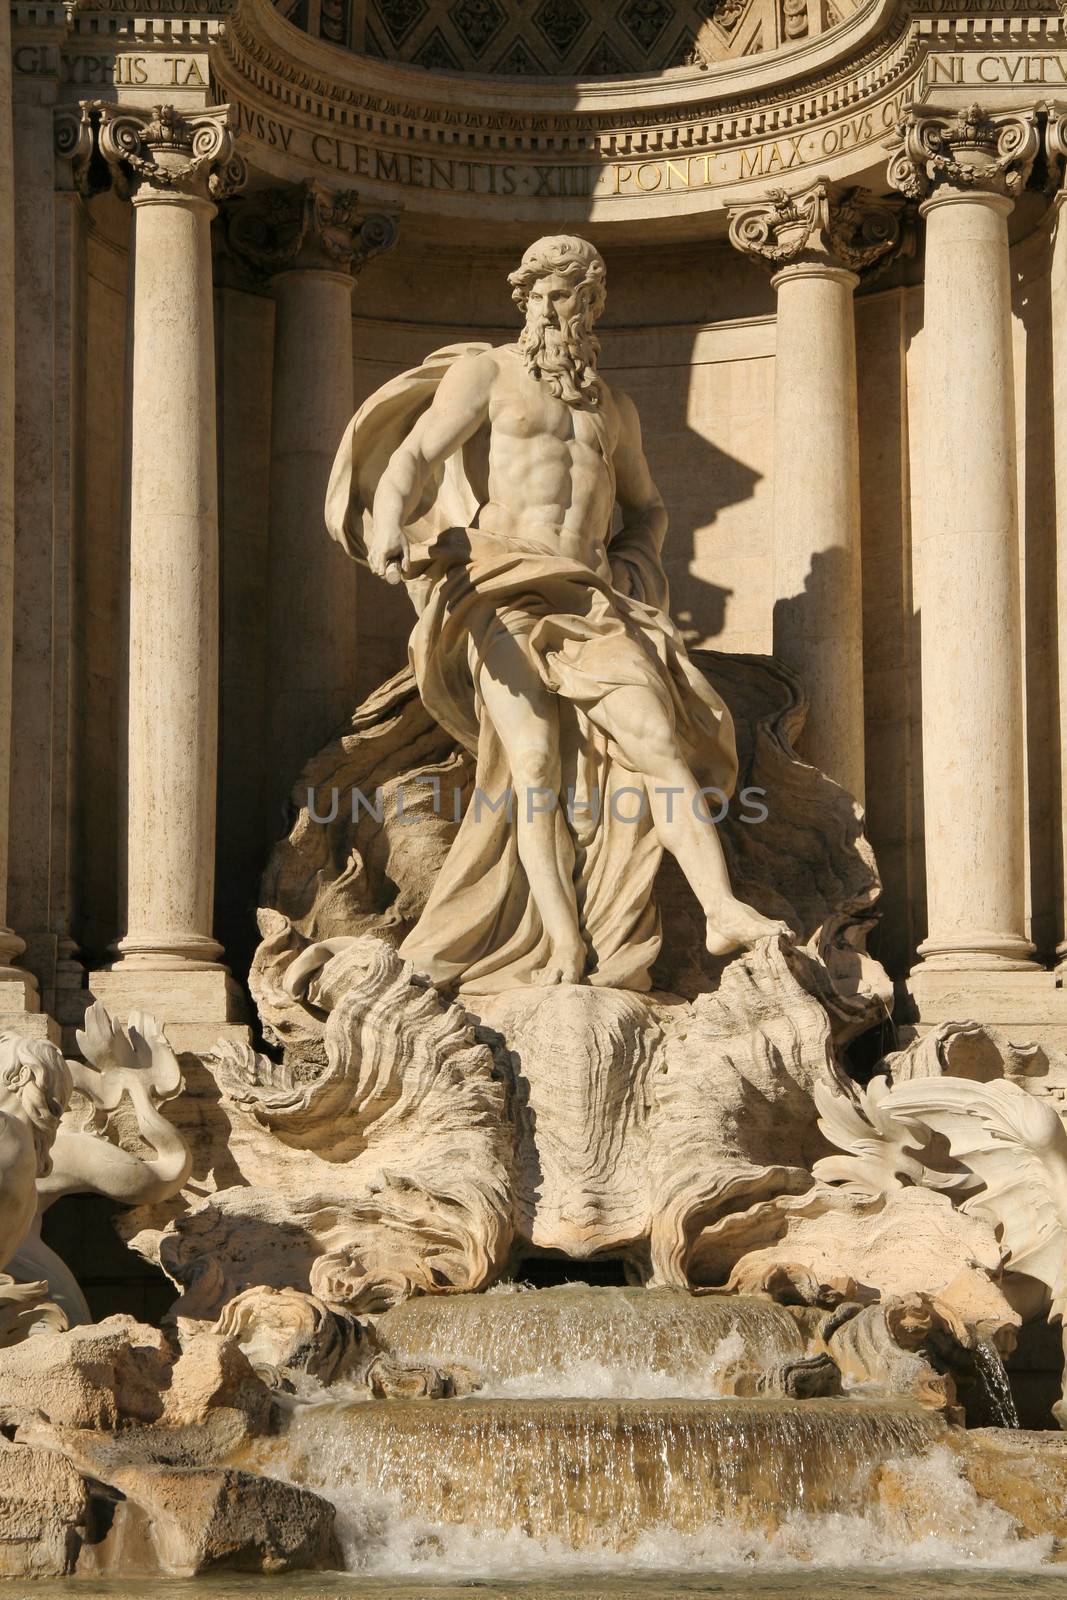 Detail of the Fontana di Trevi in Rome, Italy.